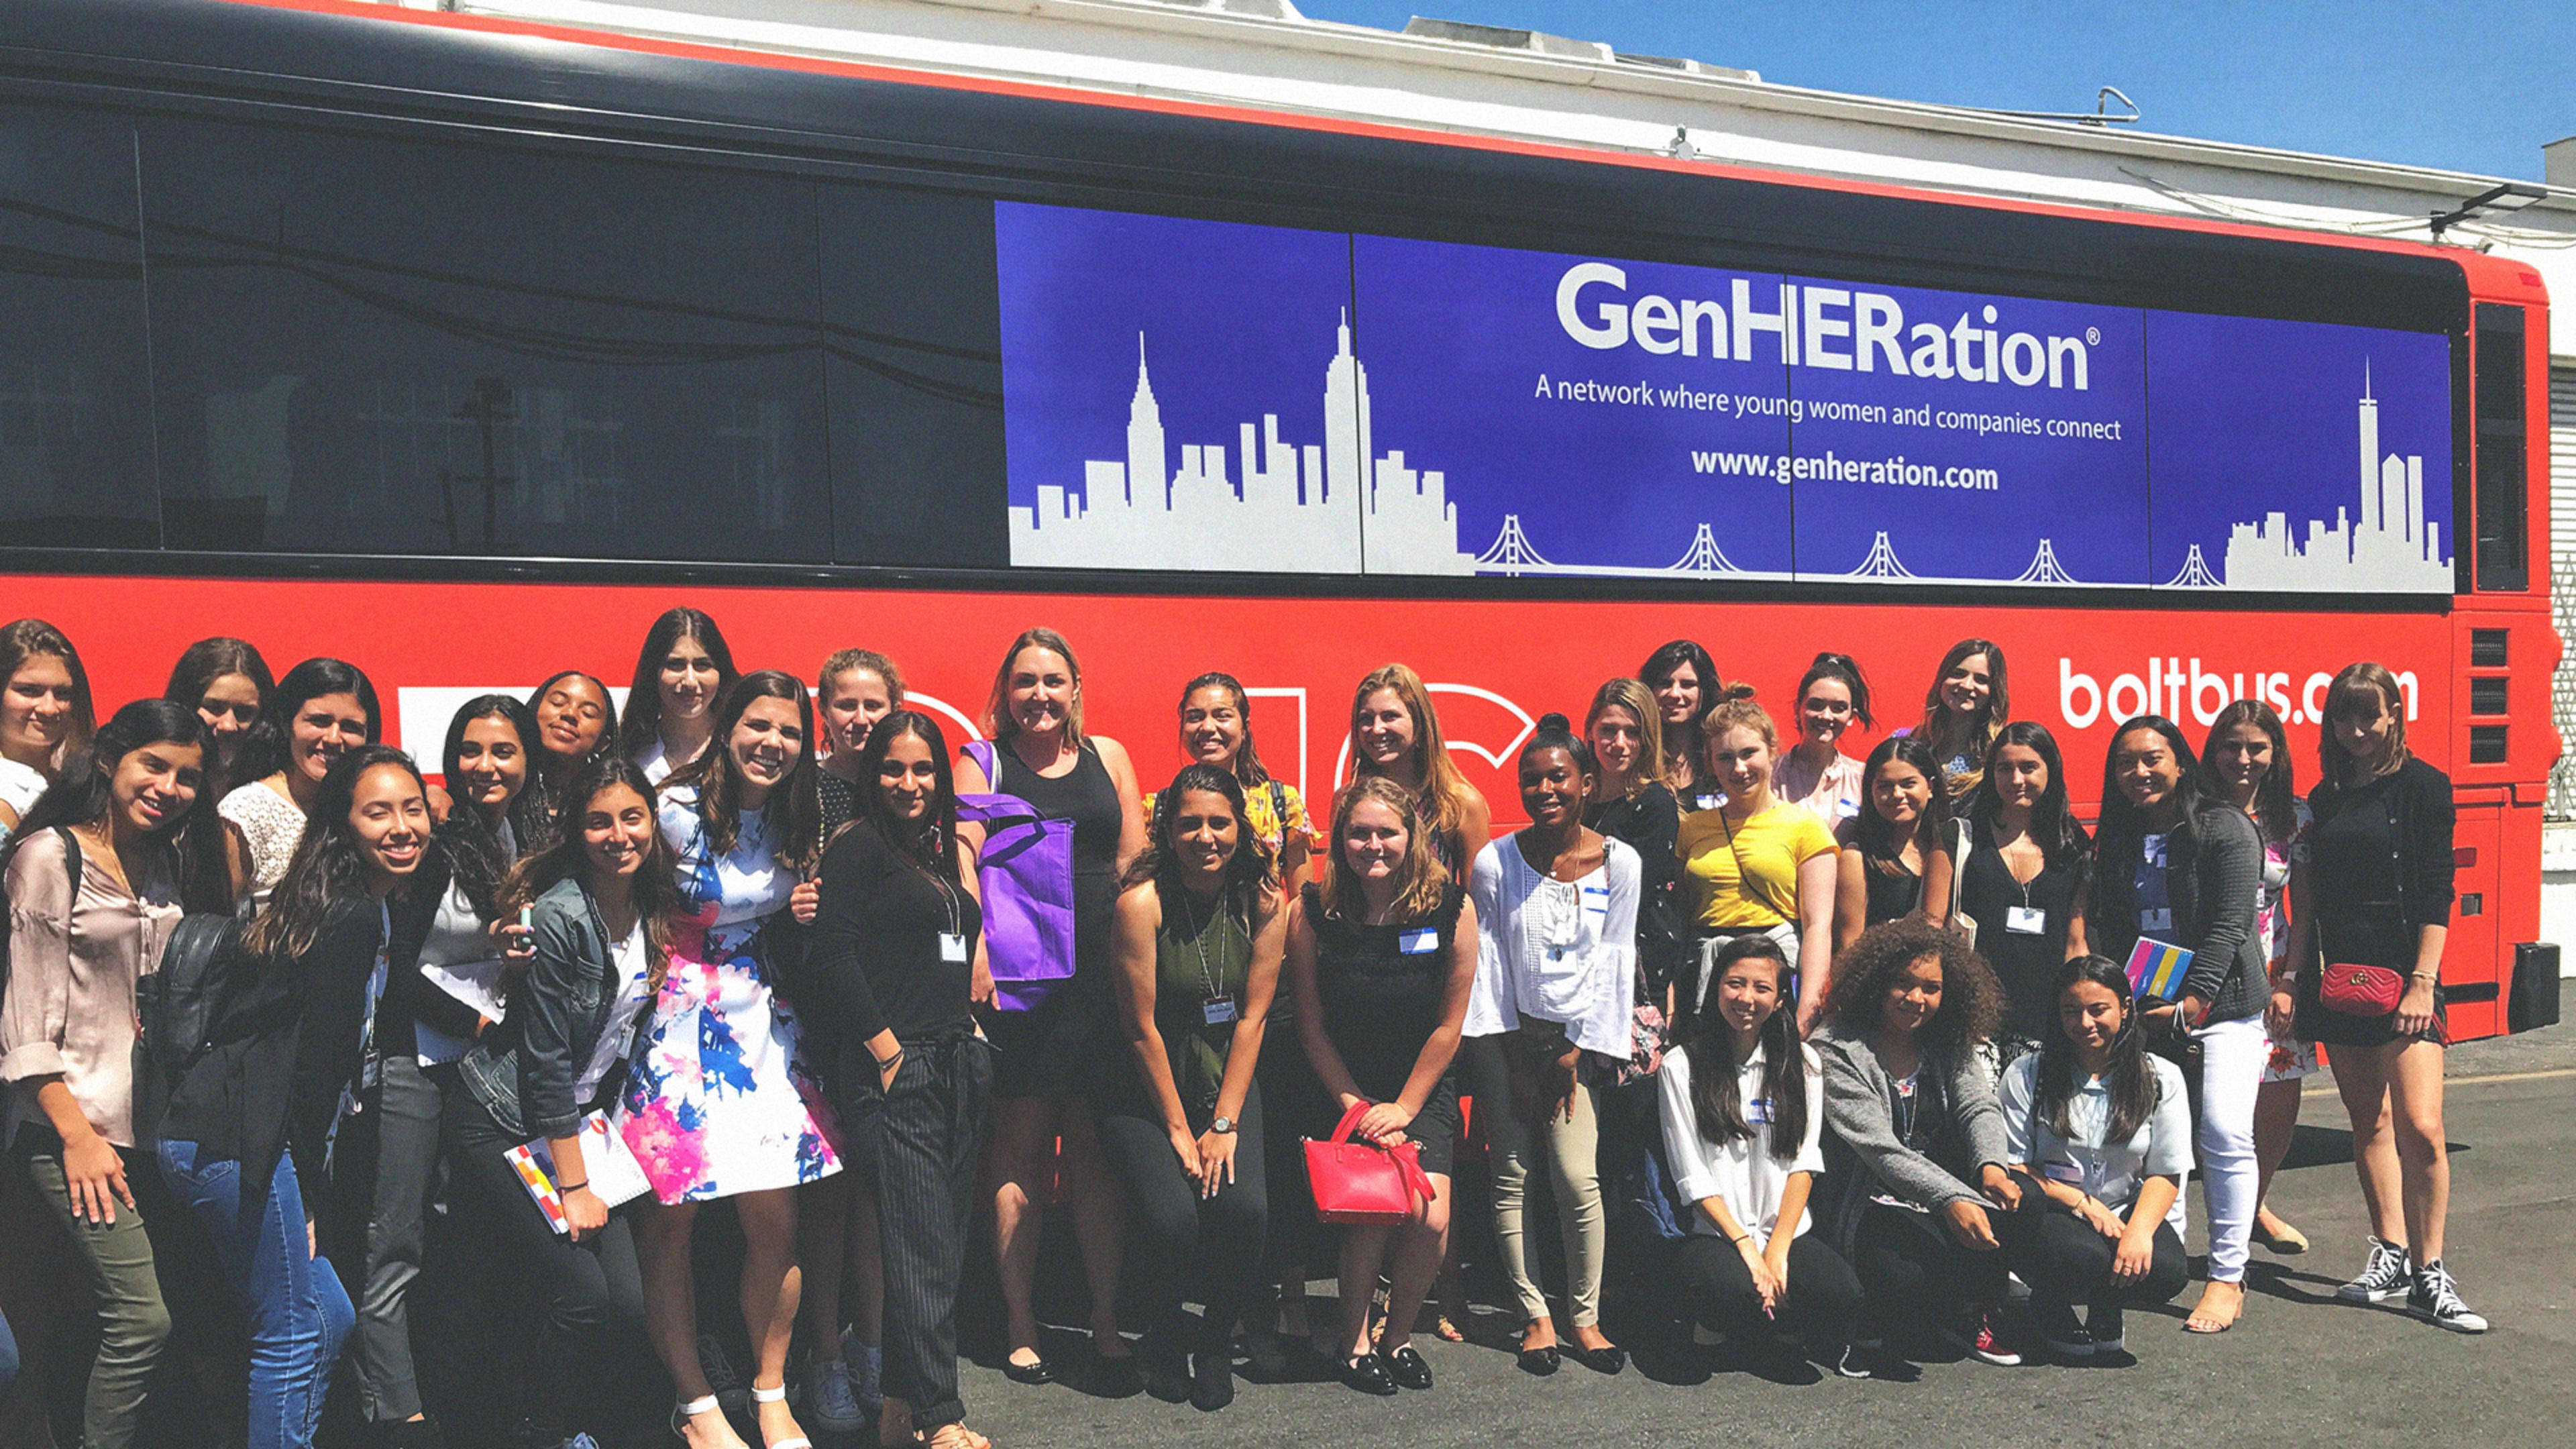 The bus tours tackling the workplace gender gap one city at a time